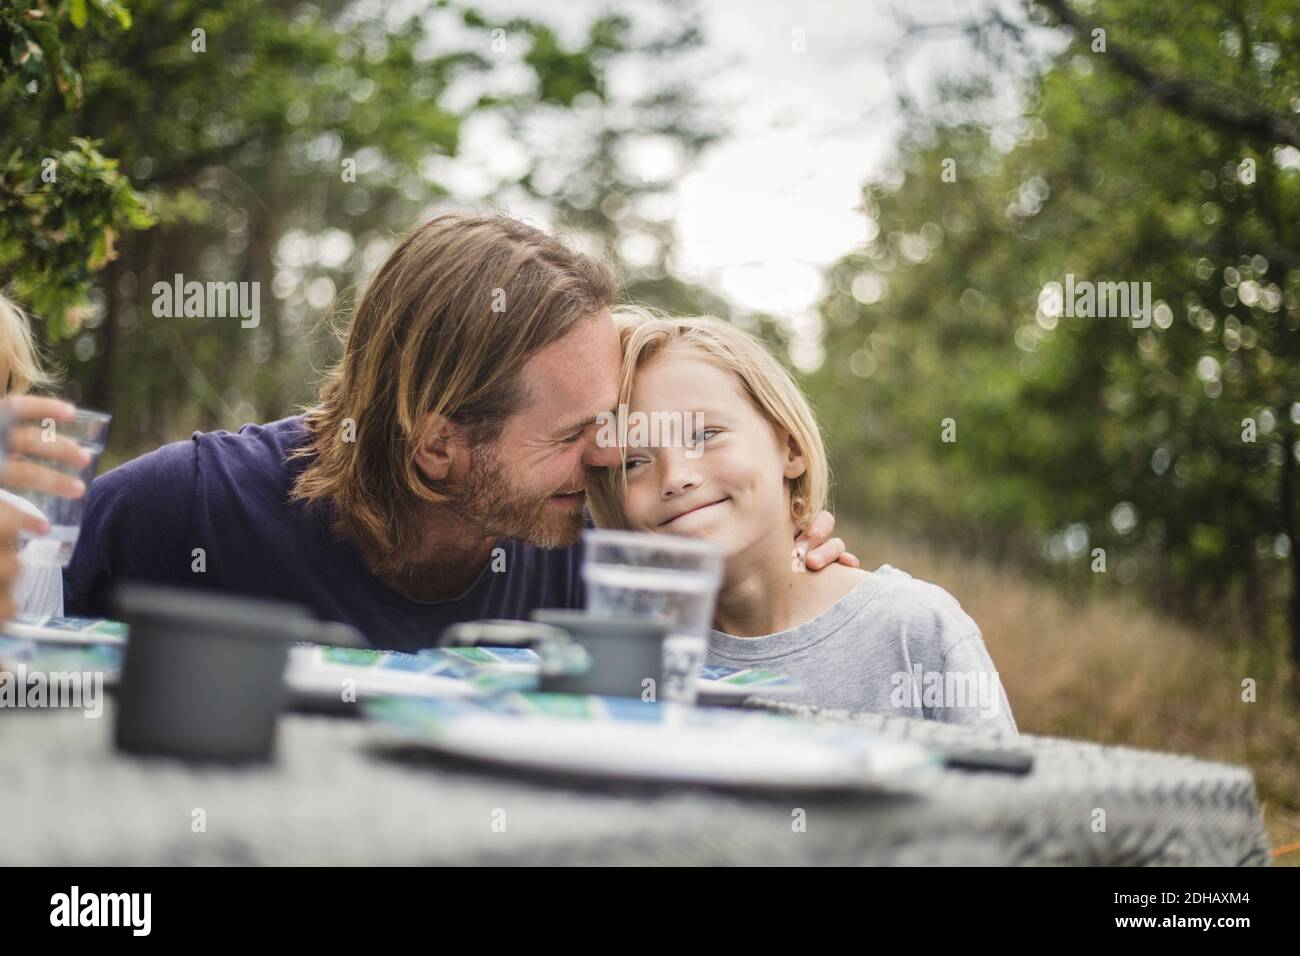 Affectionate father embracing daughter at table in campsite Stock Photo